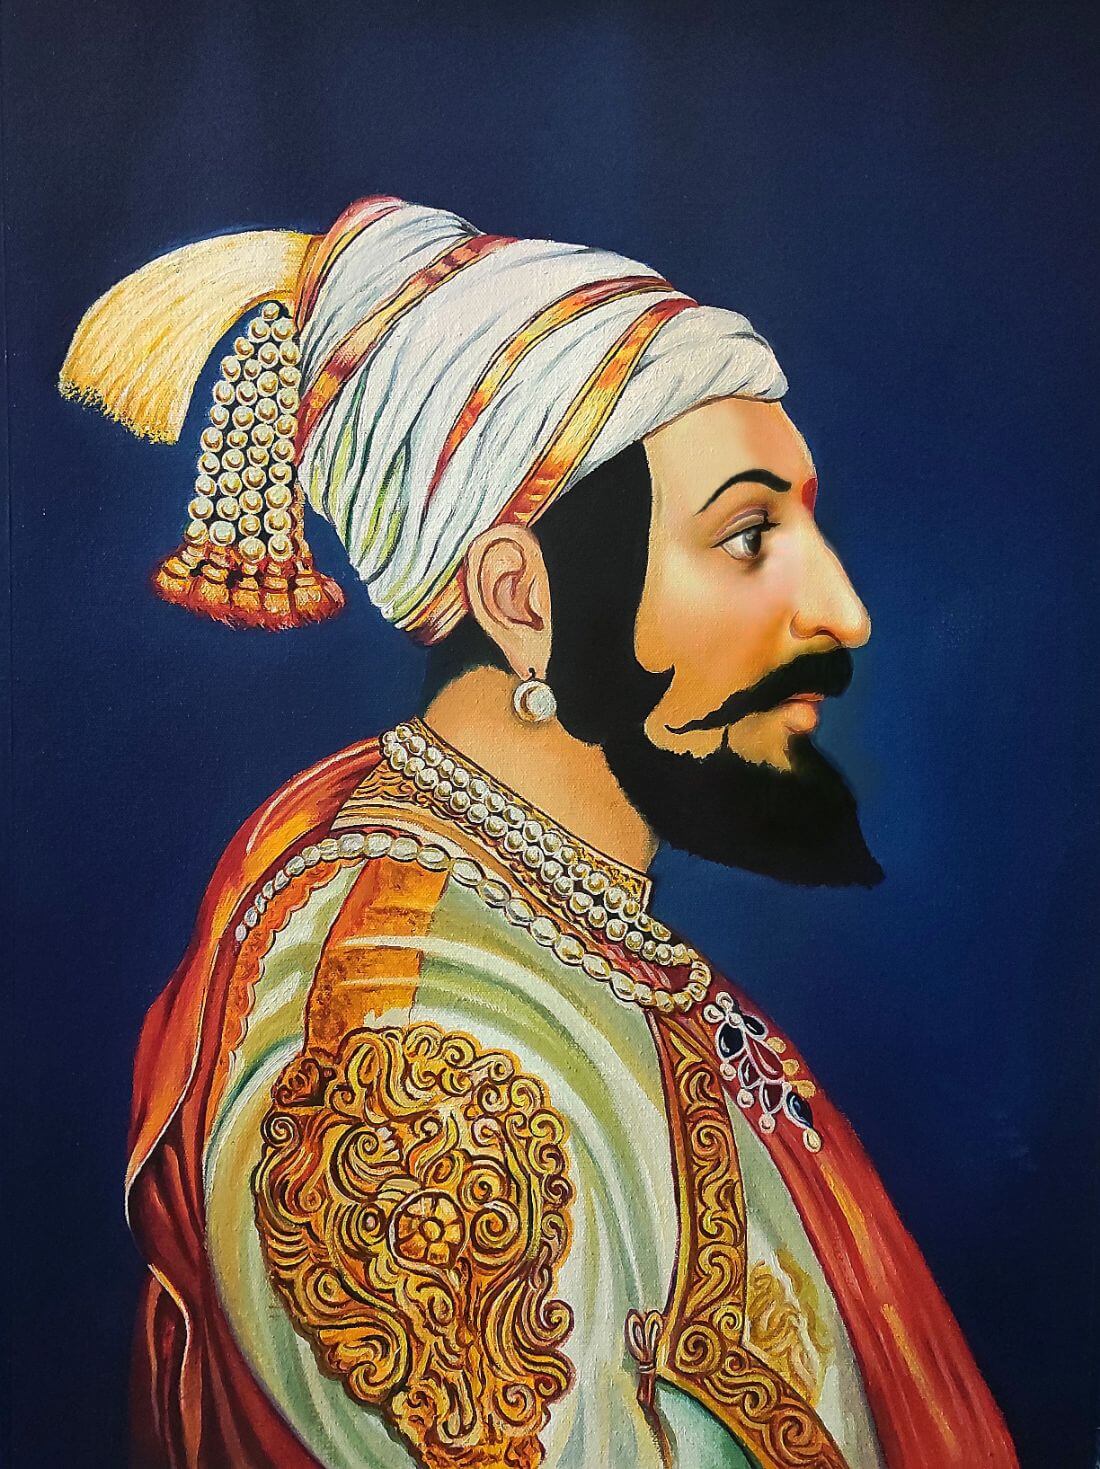 Remembering the inspiring quotes by Chhatrapati Shivaji - India Today